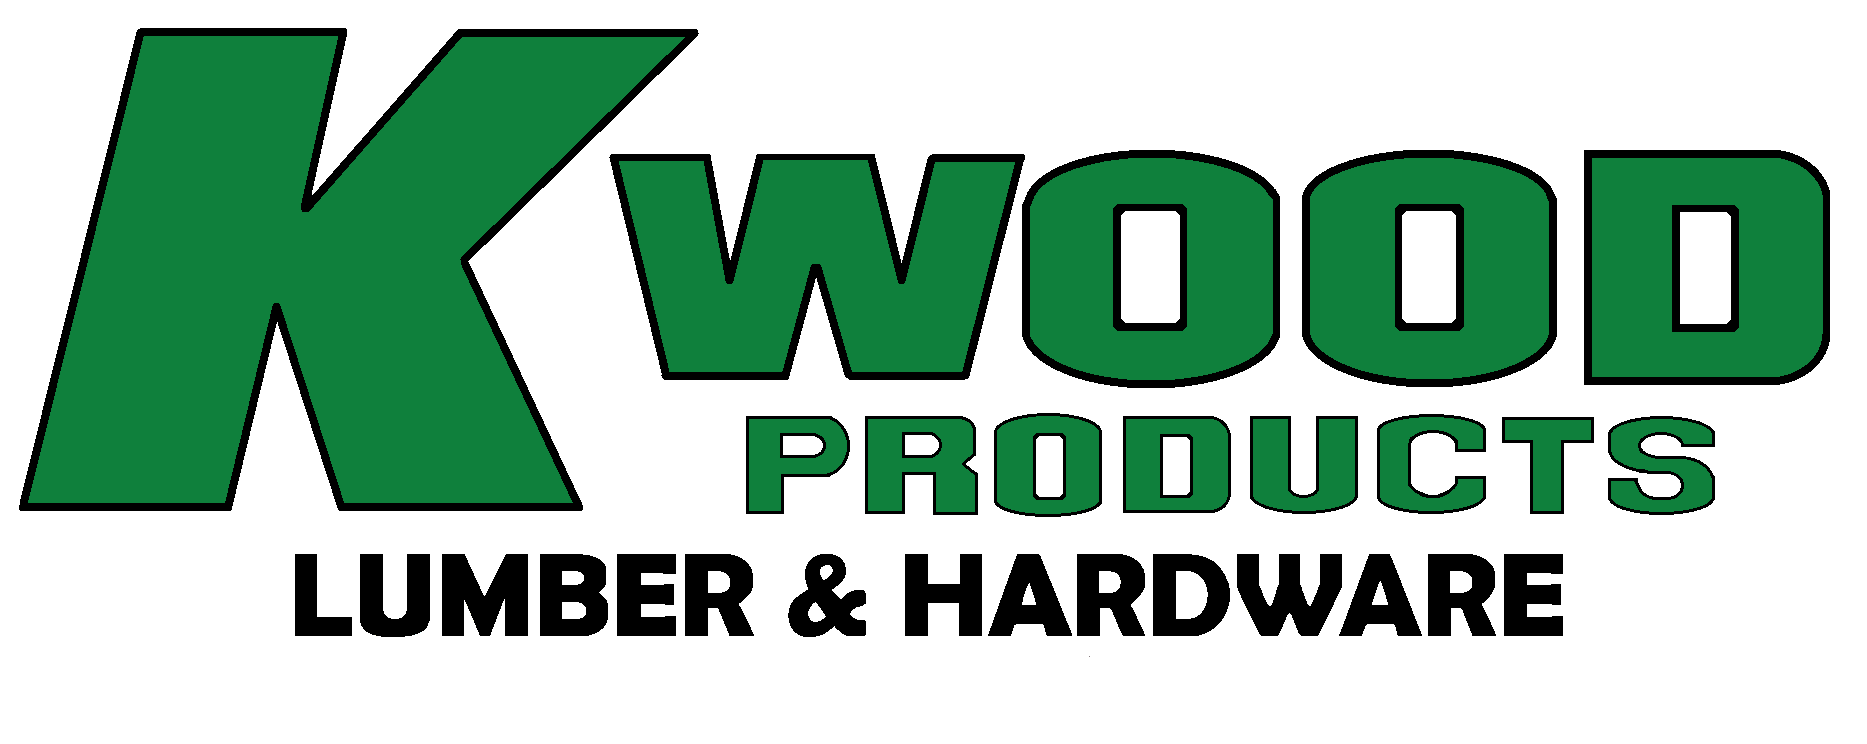 K-Wood Products Lumber, Hardware, & Building Materials